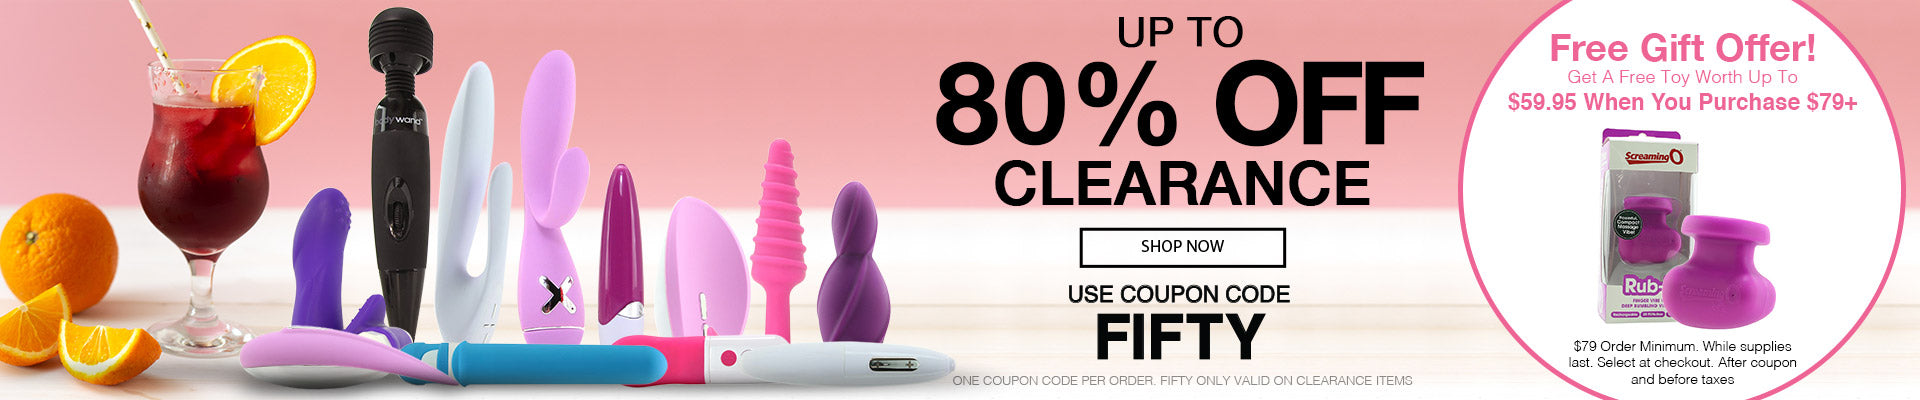 Up To 80% Off Clearance - Use Code FIFTY